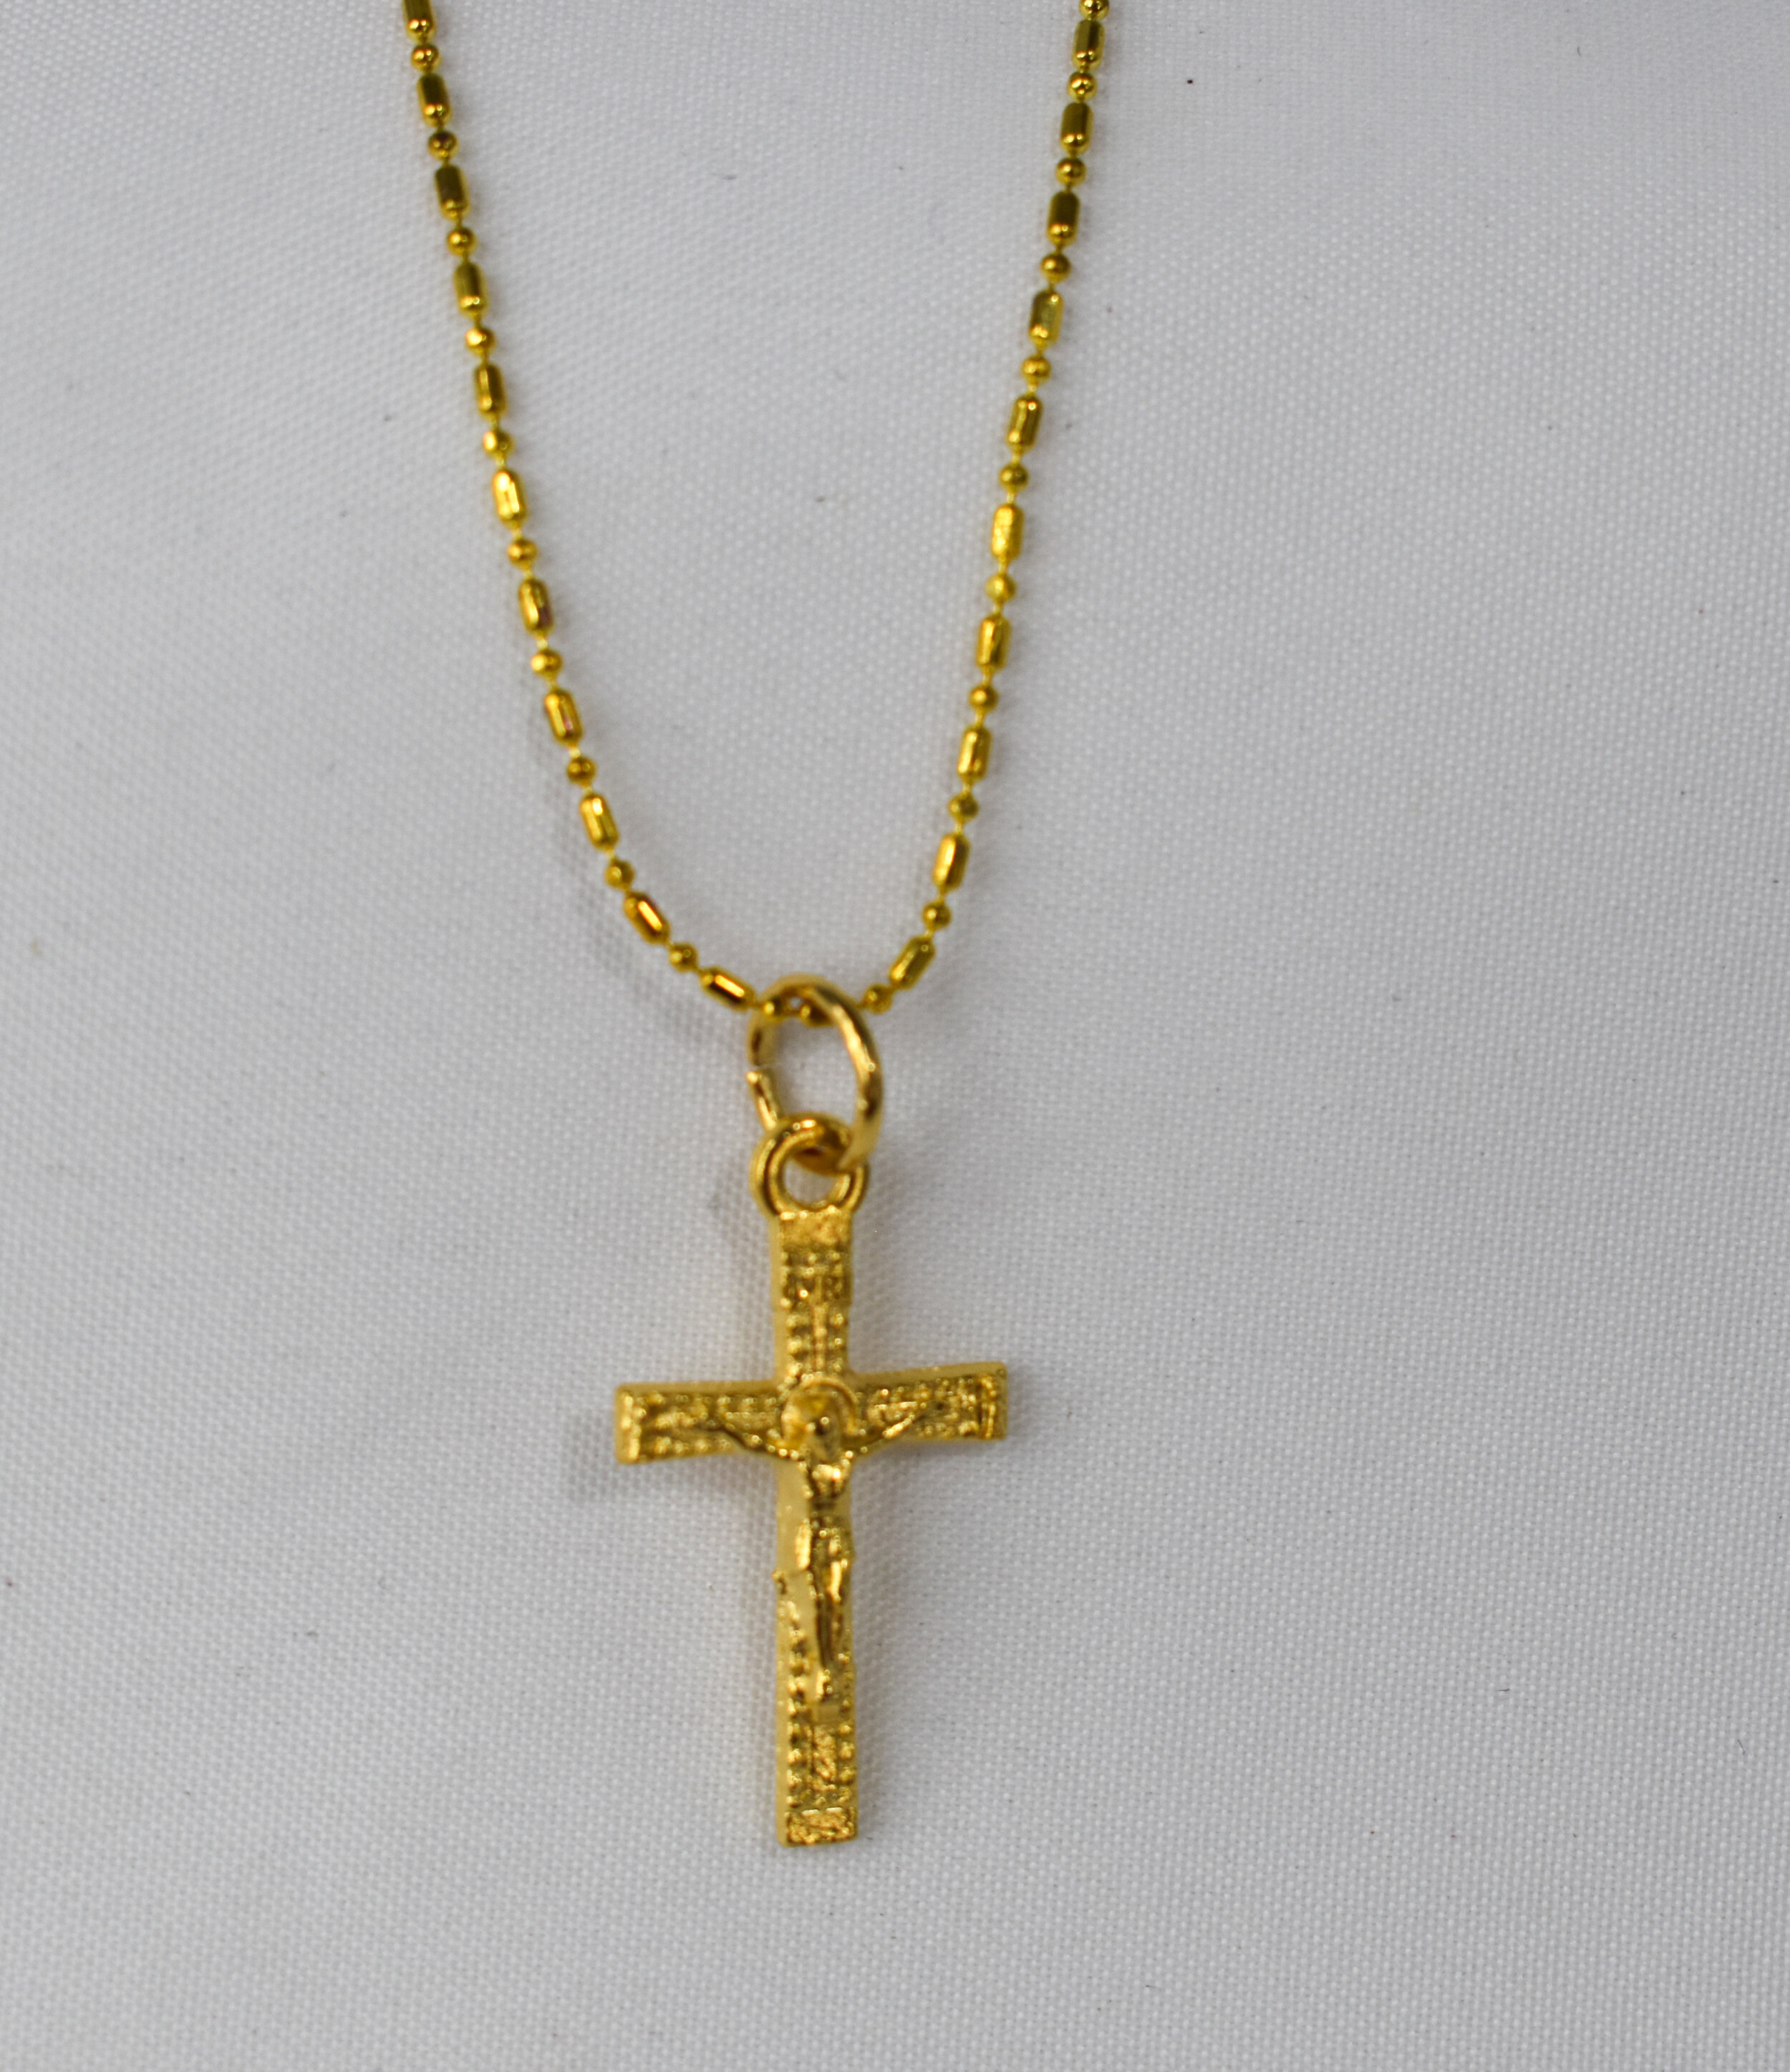 Small Cross Necklace - Michelle Chang